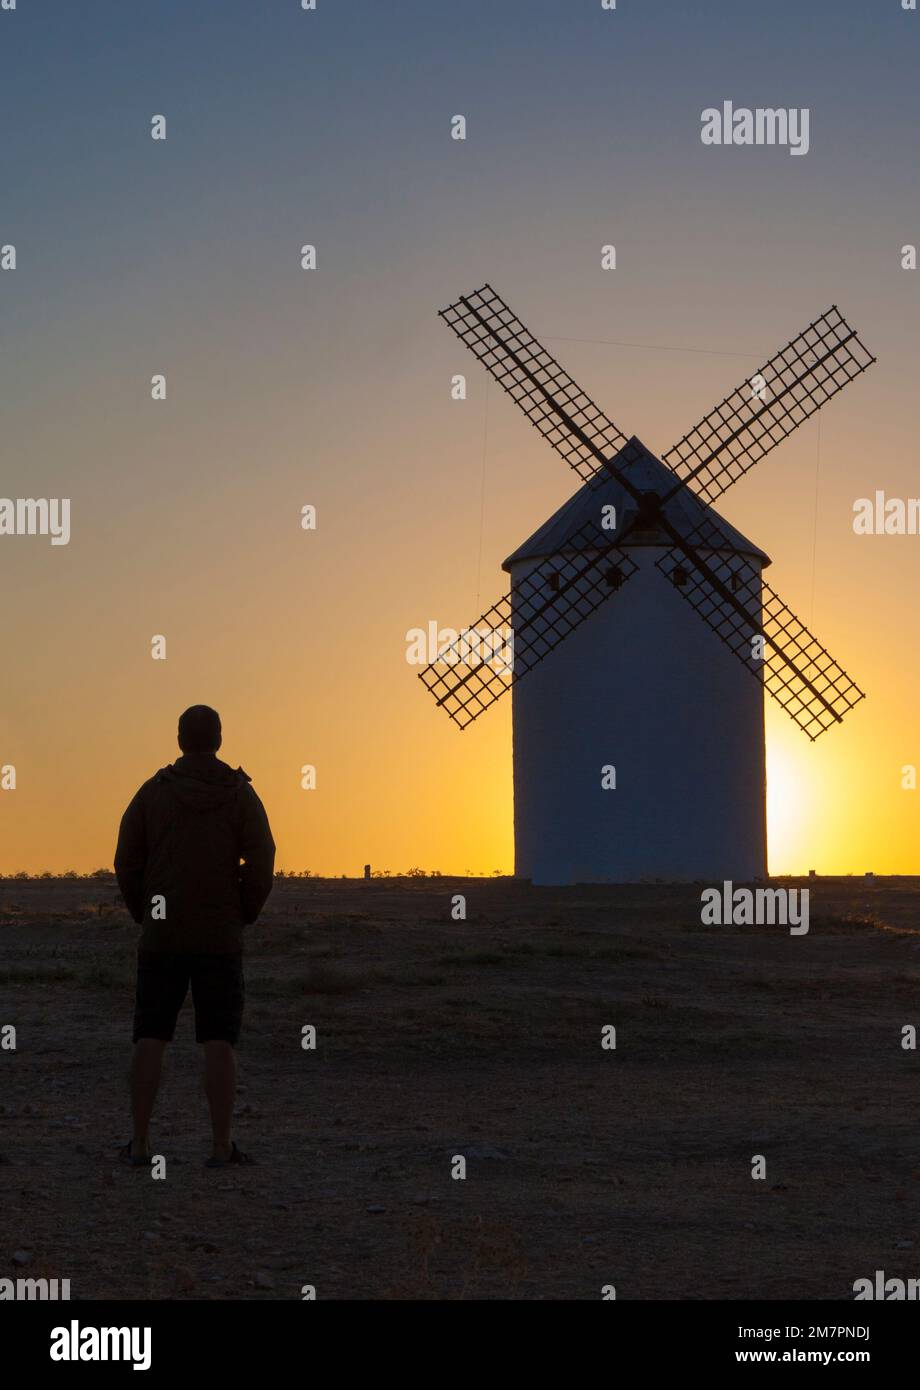 Man observing the Campo de Criptana windmills at rising through site, Spain. Ciudad Real, Spain Stock Photo